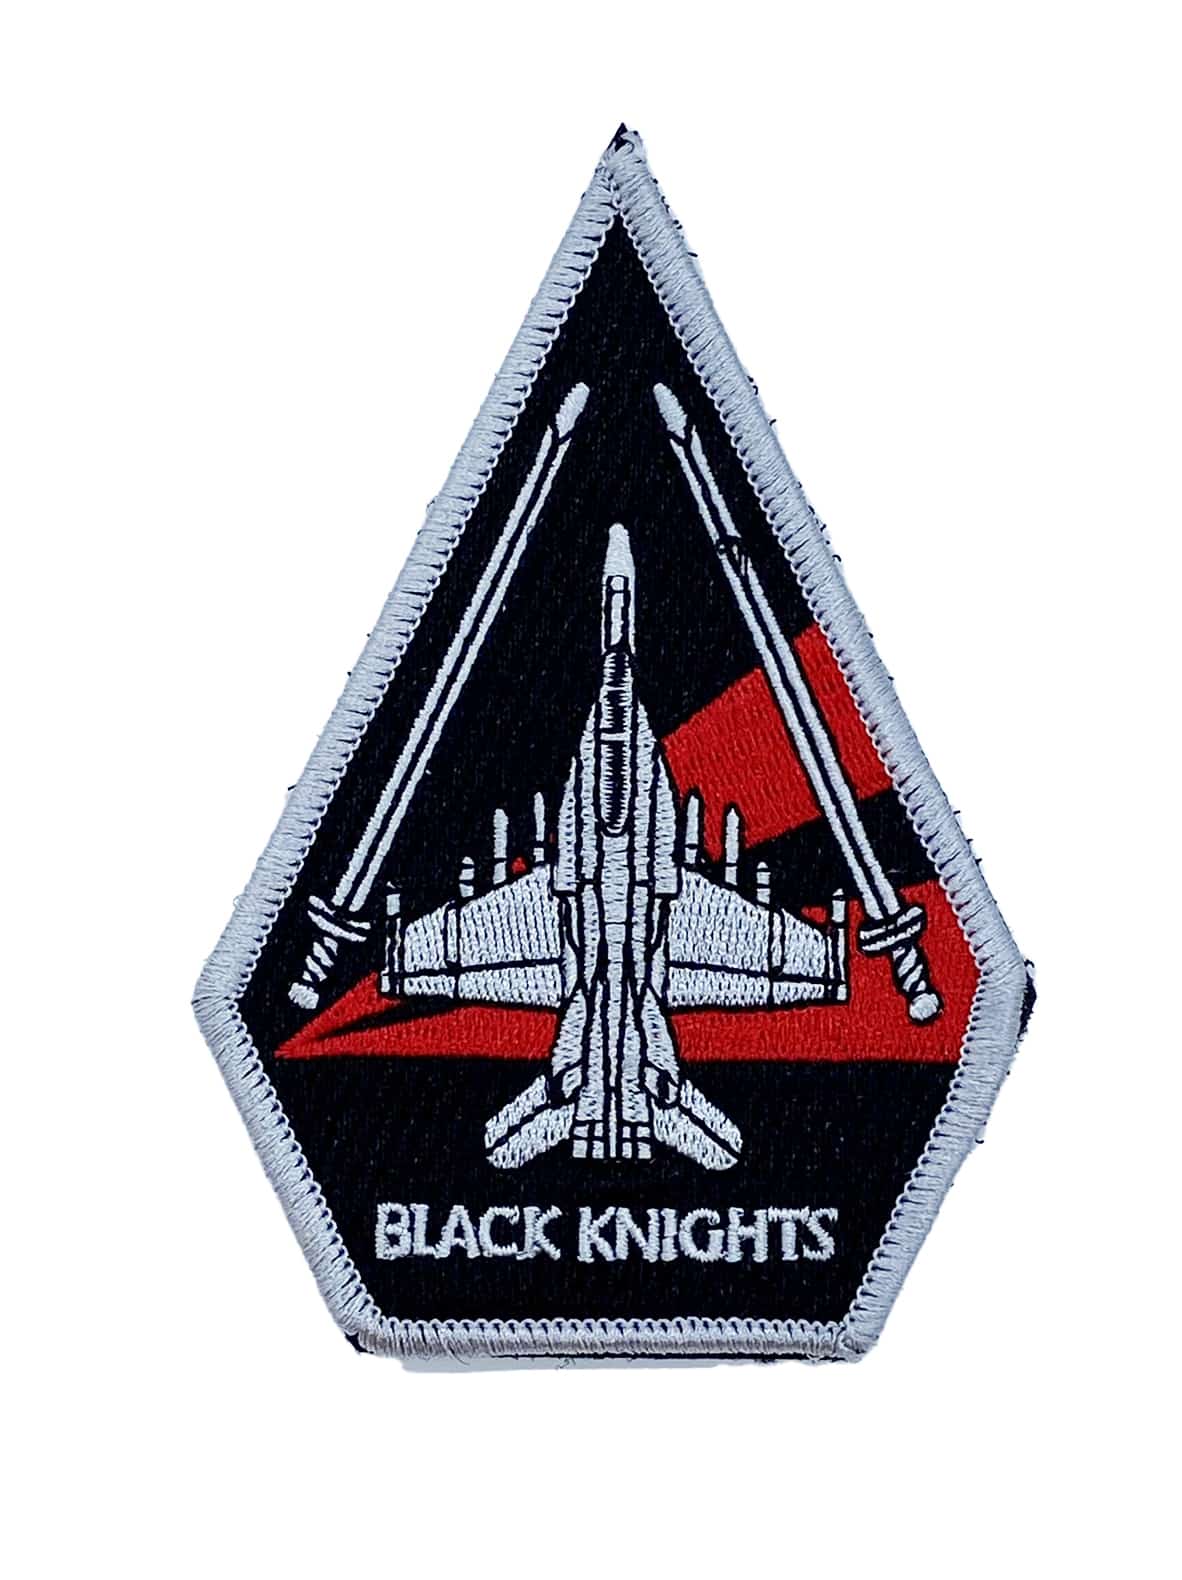 VFA-154 Black Knights Shoulder and Chest Patches Triangle - With Hook and Loop